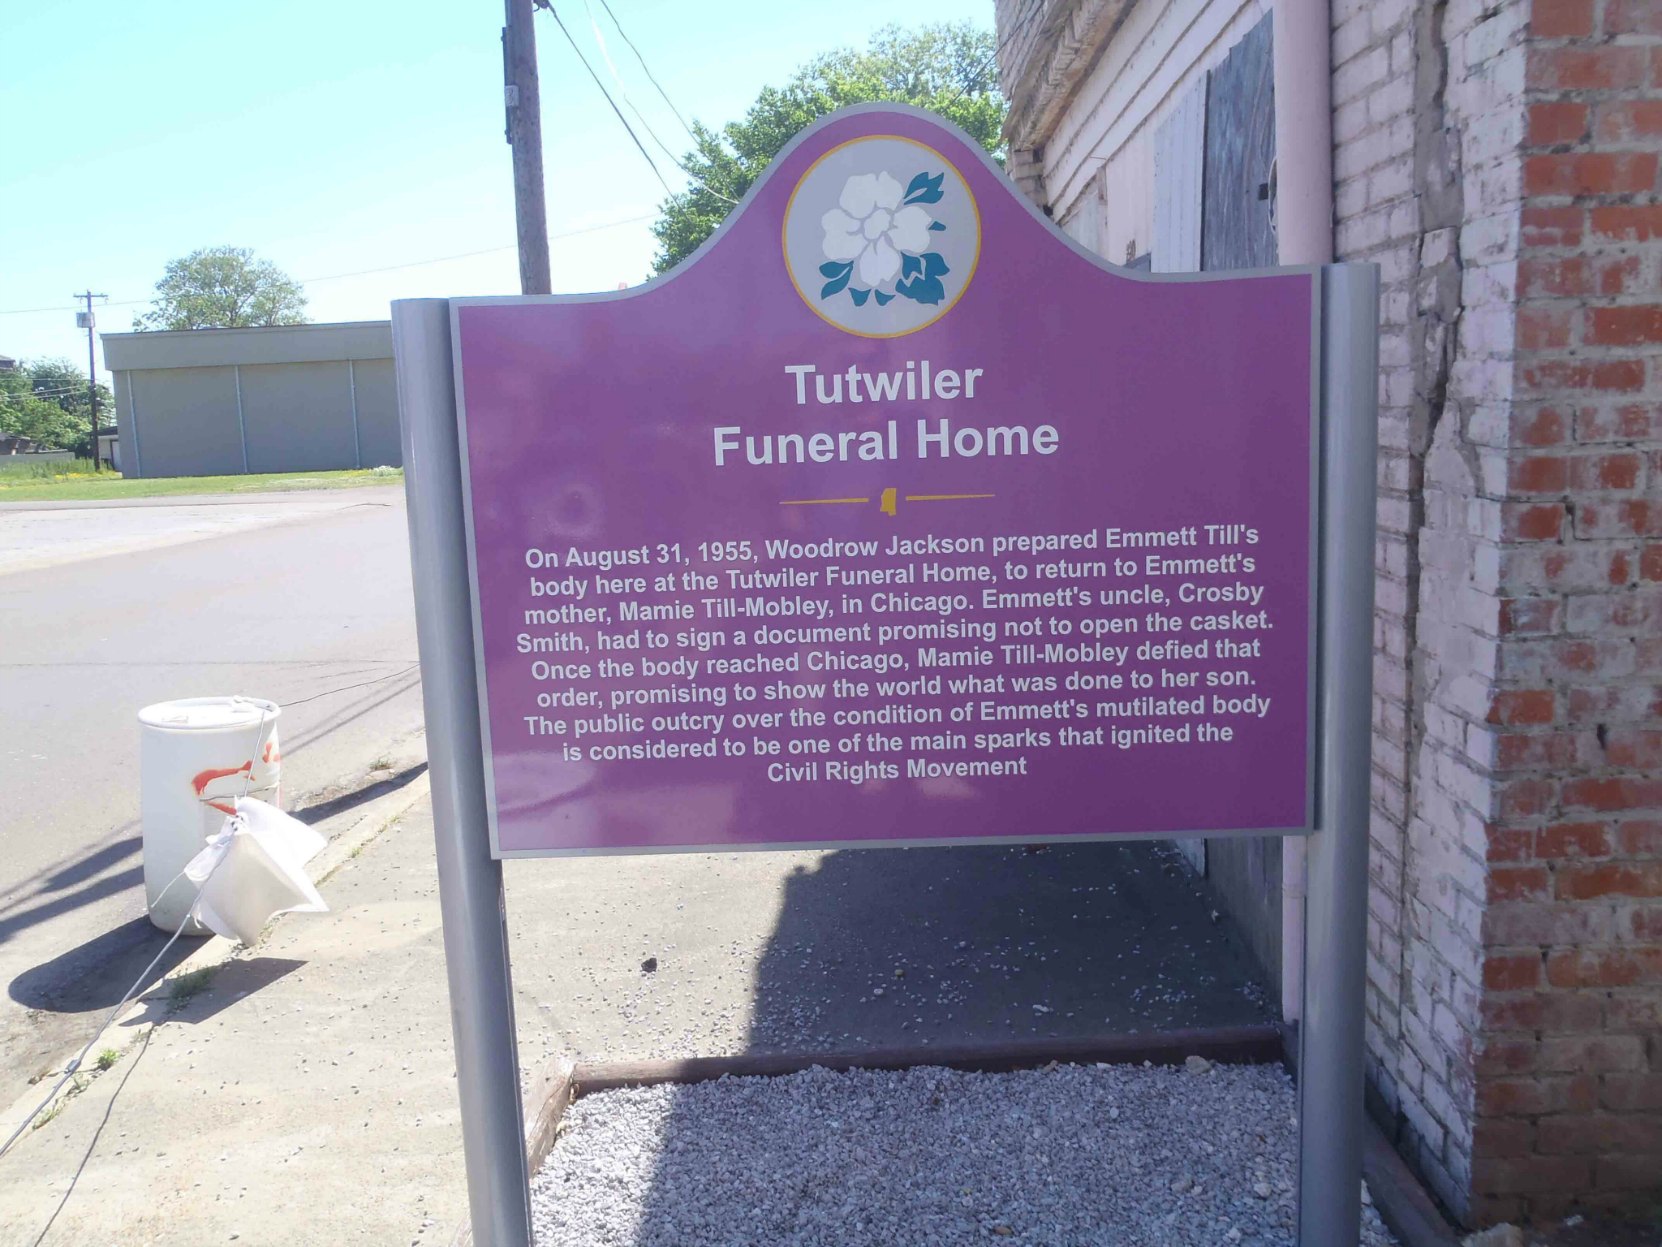 The sign outside the former Tutwiler Funeral Home, where Emmett Till's body was prepared for transportation to Chicago in August 1955.